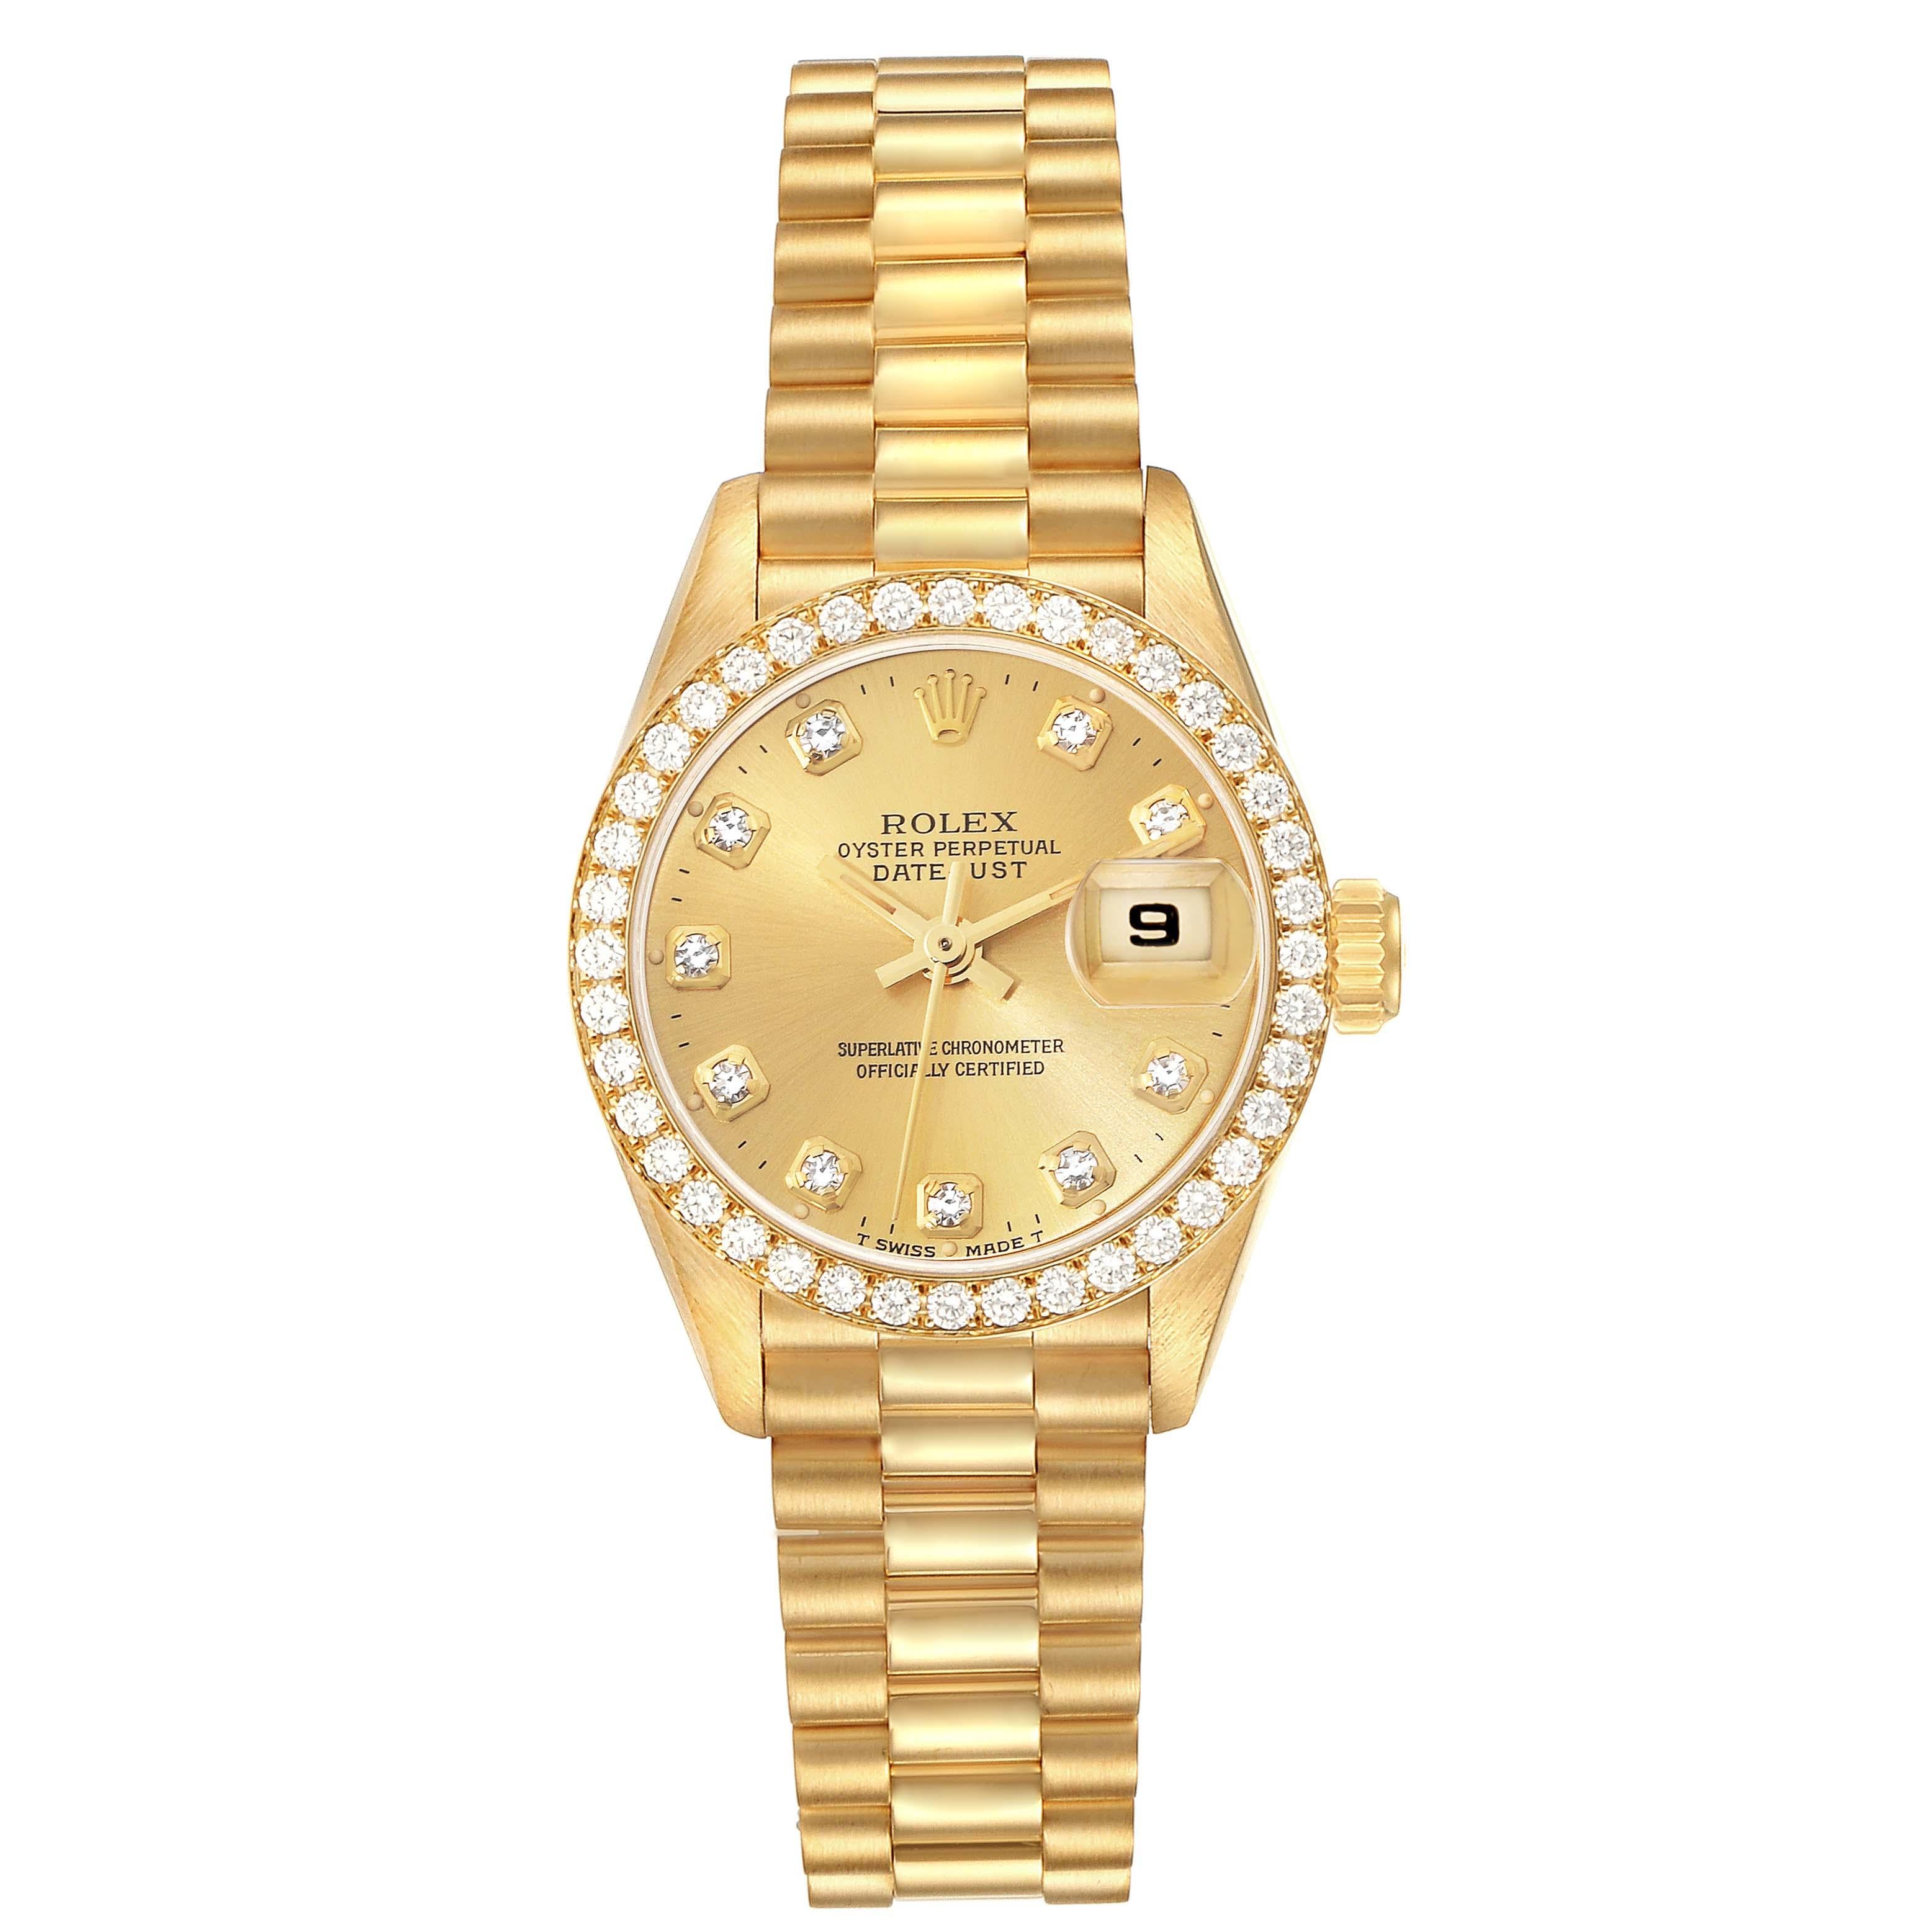 Rolex President Datejust Yellow Gold Diamond Ladies Watch 69138. Officially certified chronometer automatic self-winding movement. 18k yellow gold oyster case 26.0 mm in diameter. Rolex logo on the crown. 18k yellow gold original Rolex factory